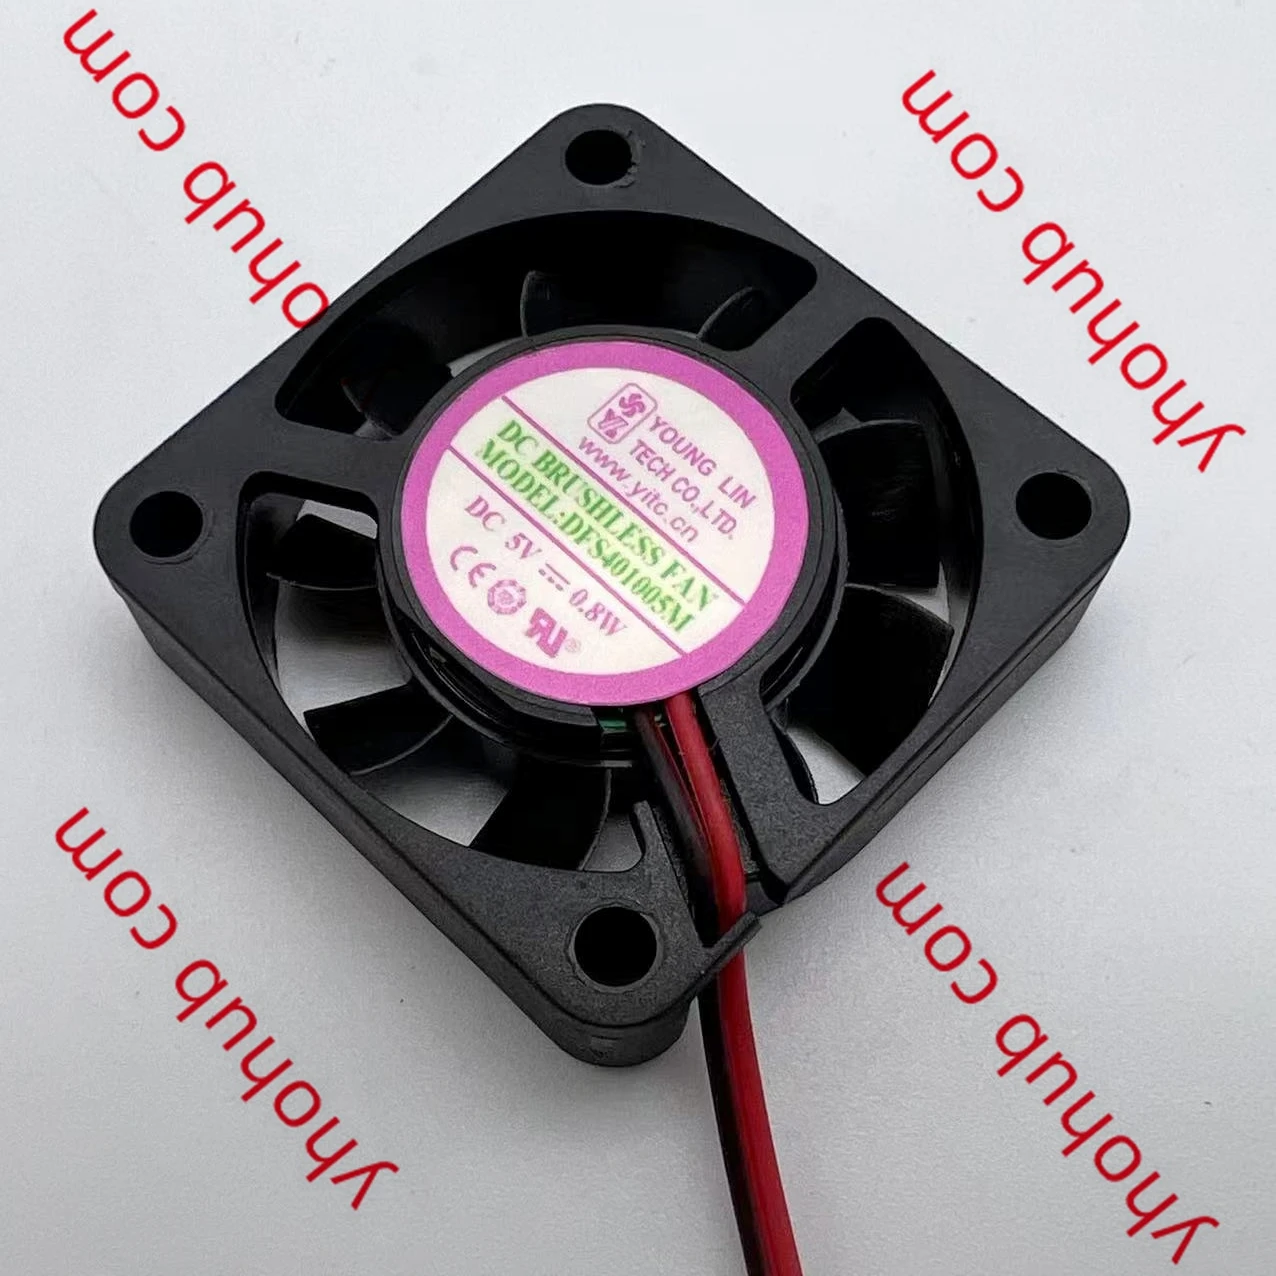 Young Lin DFS401005M DC 5V 0.8W 40x40x10mm 2-Wire Server Cooling Fan